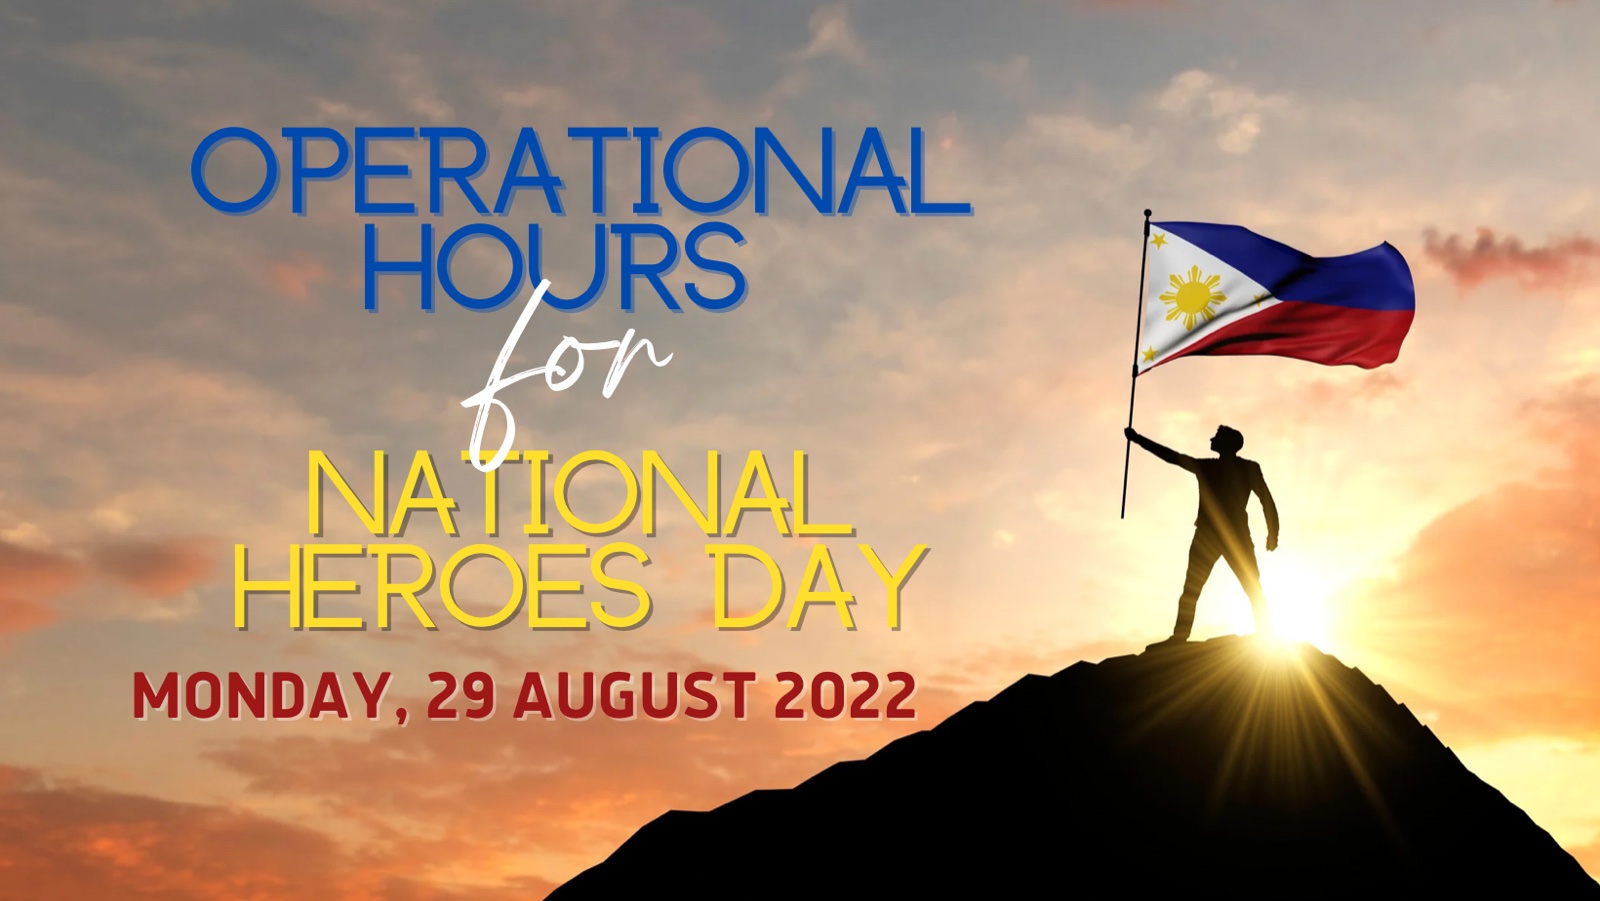 National Heroes Day Operational Hours 29 August 2022 Manila Polo Club